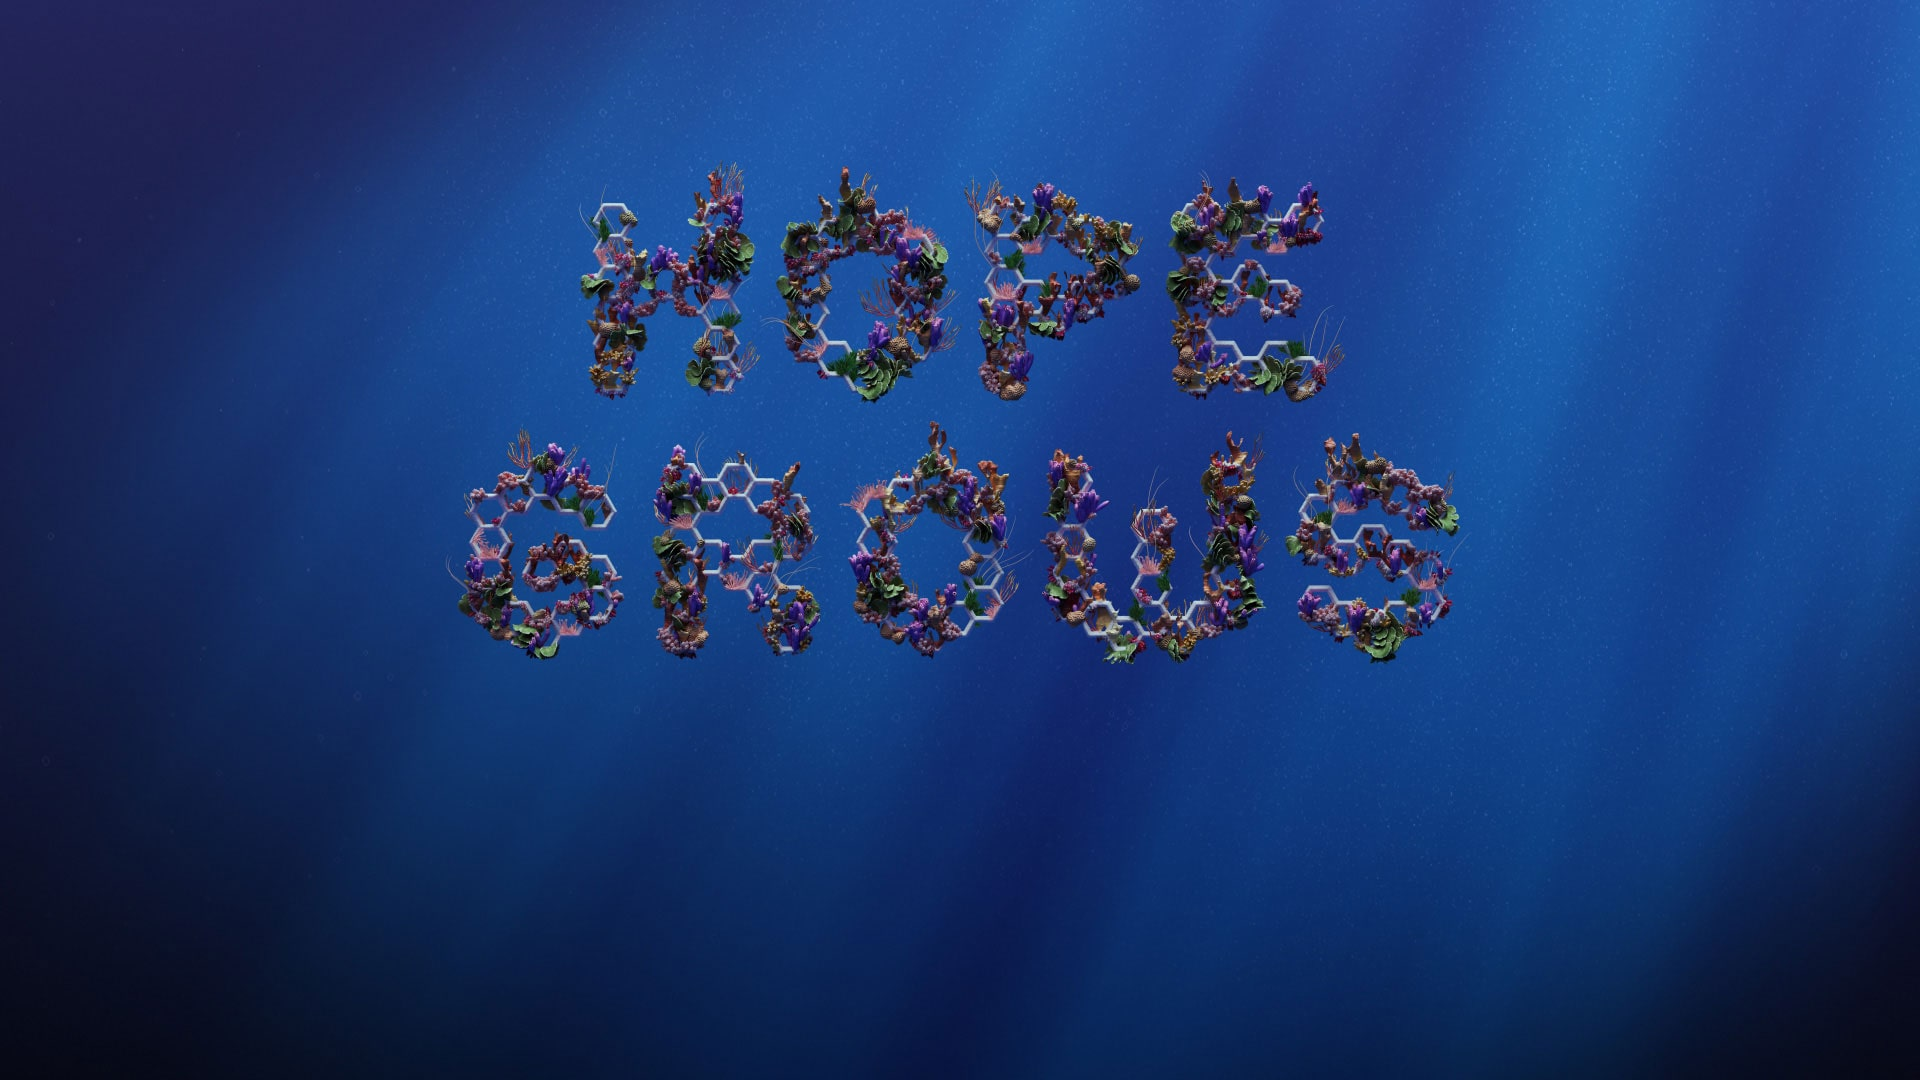 coral reef letters spelling the words hope grows